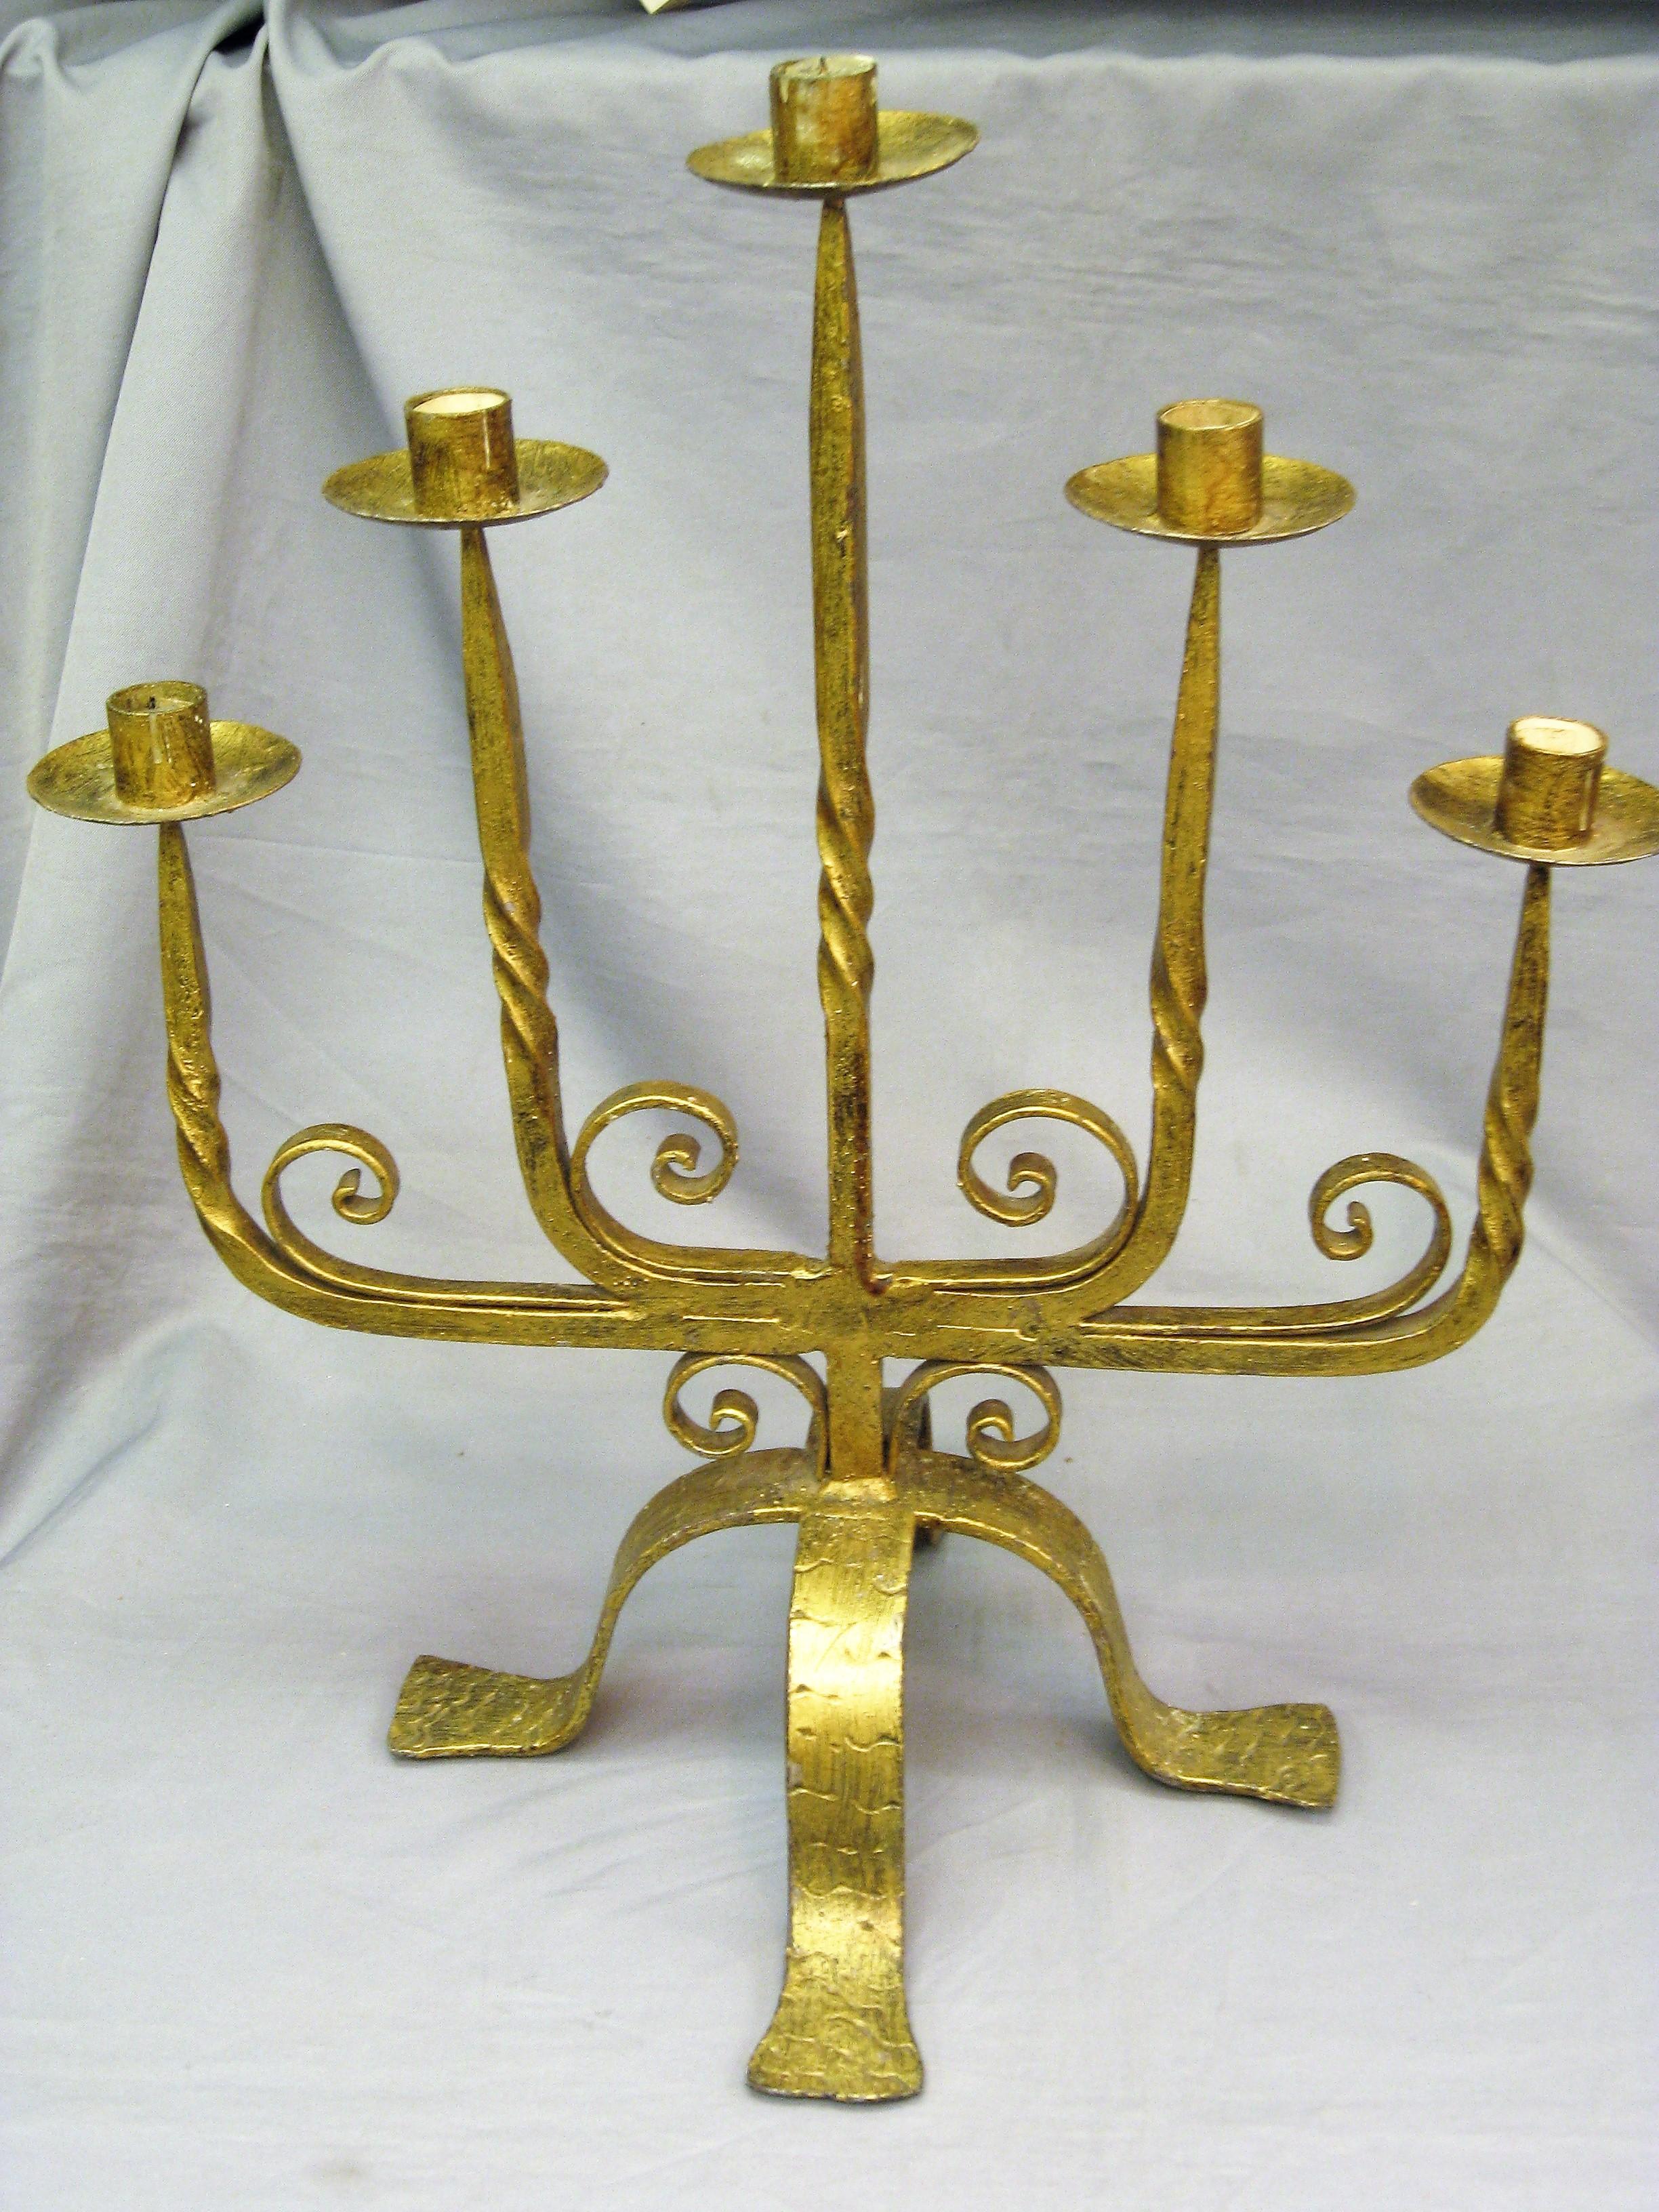 Large French hammered iron gold leafed candle holder. Five arms or candle branches with four arched leg base, twisted arms and scroll details.
Can be used as a centerpiece on a dining room table or console in a Minimalist or even Gothic decor as